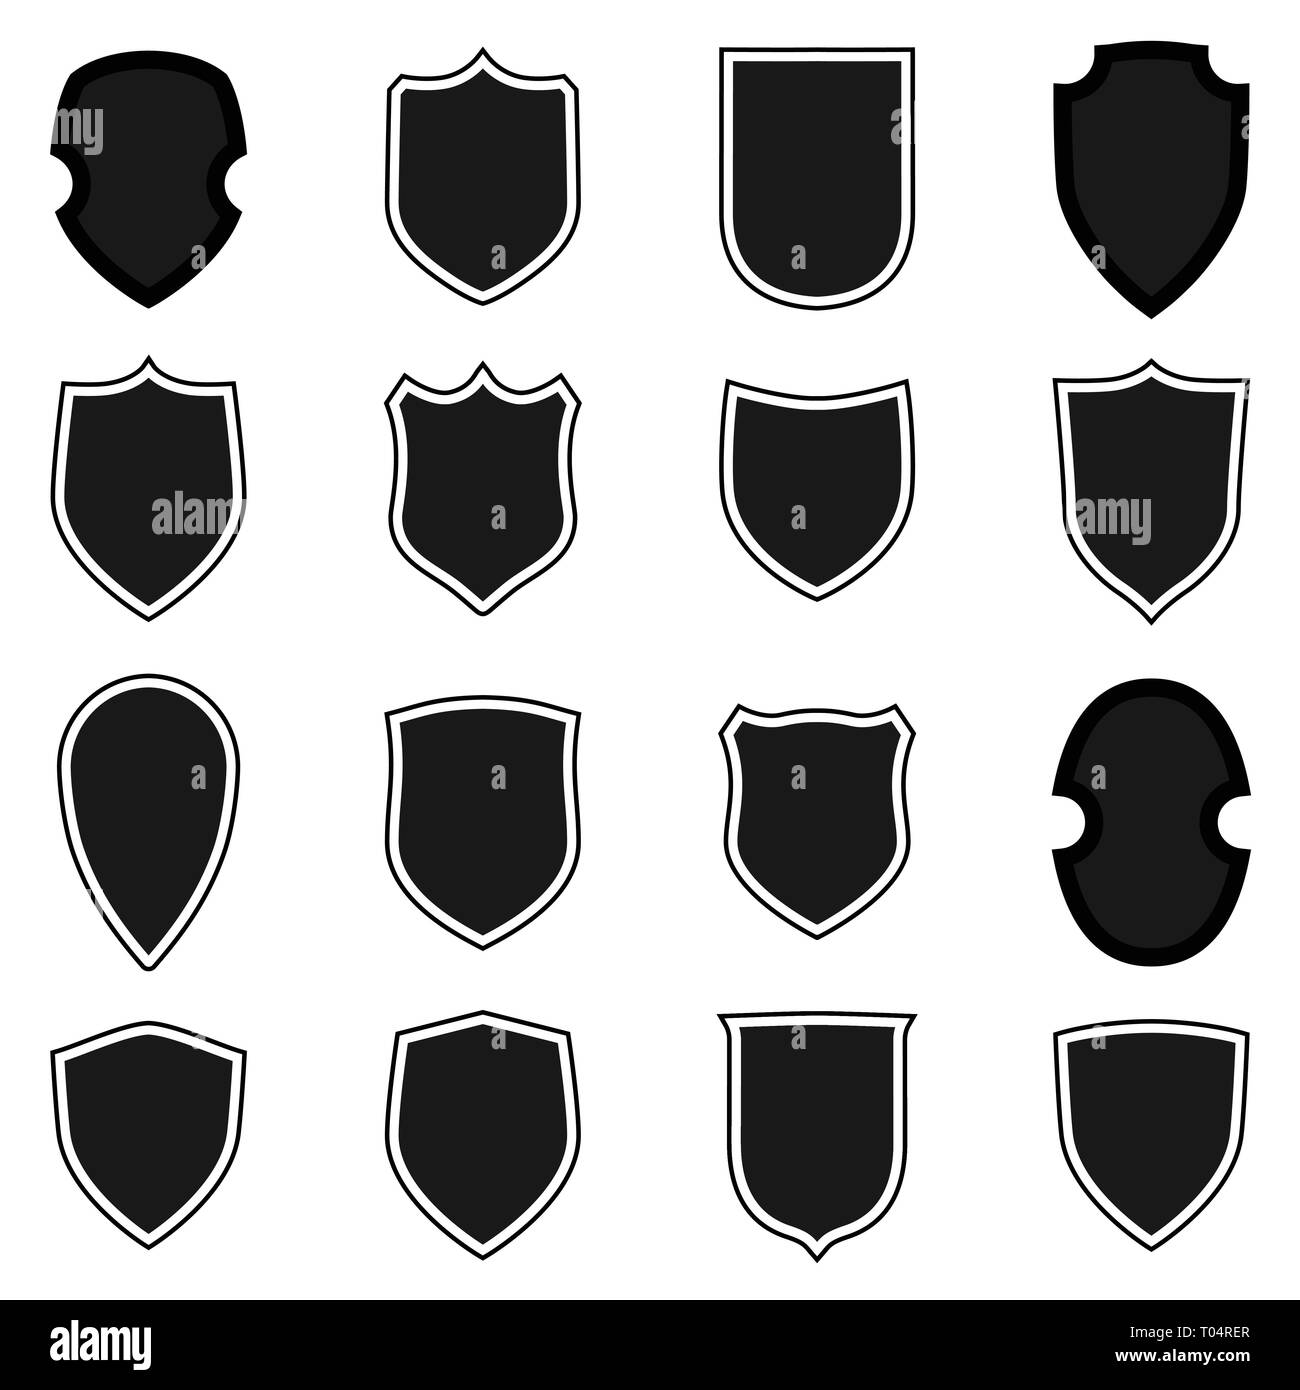 https://c8.alamy.com/comp/T04RER/shield-shape-icons-set-black-label-signs-isolated-on-white-background-symbol-of-protection-arms-security-safety-flat-retro-style-design-T04RER.jpg